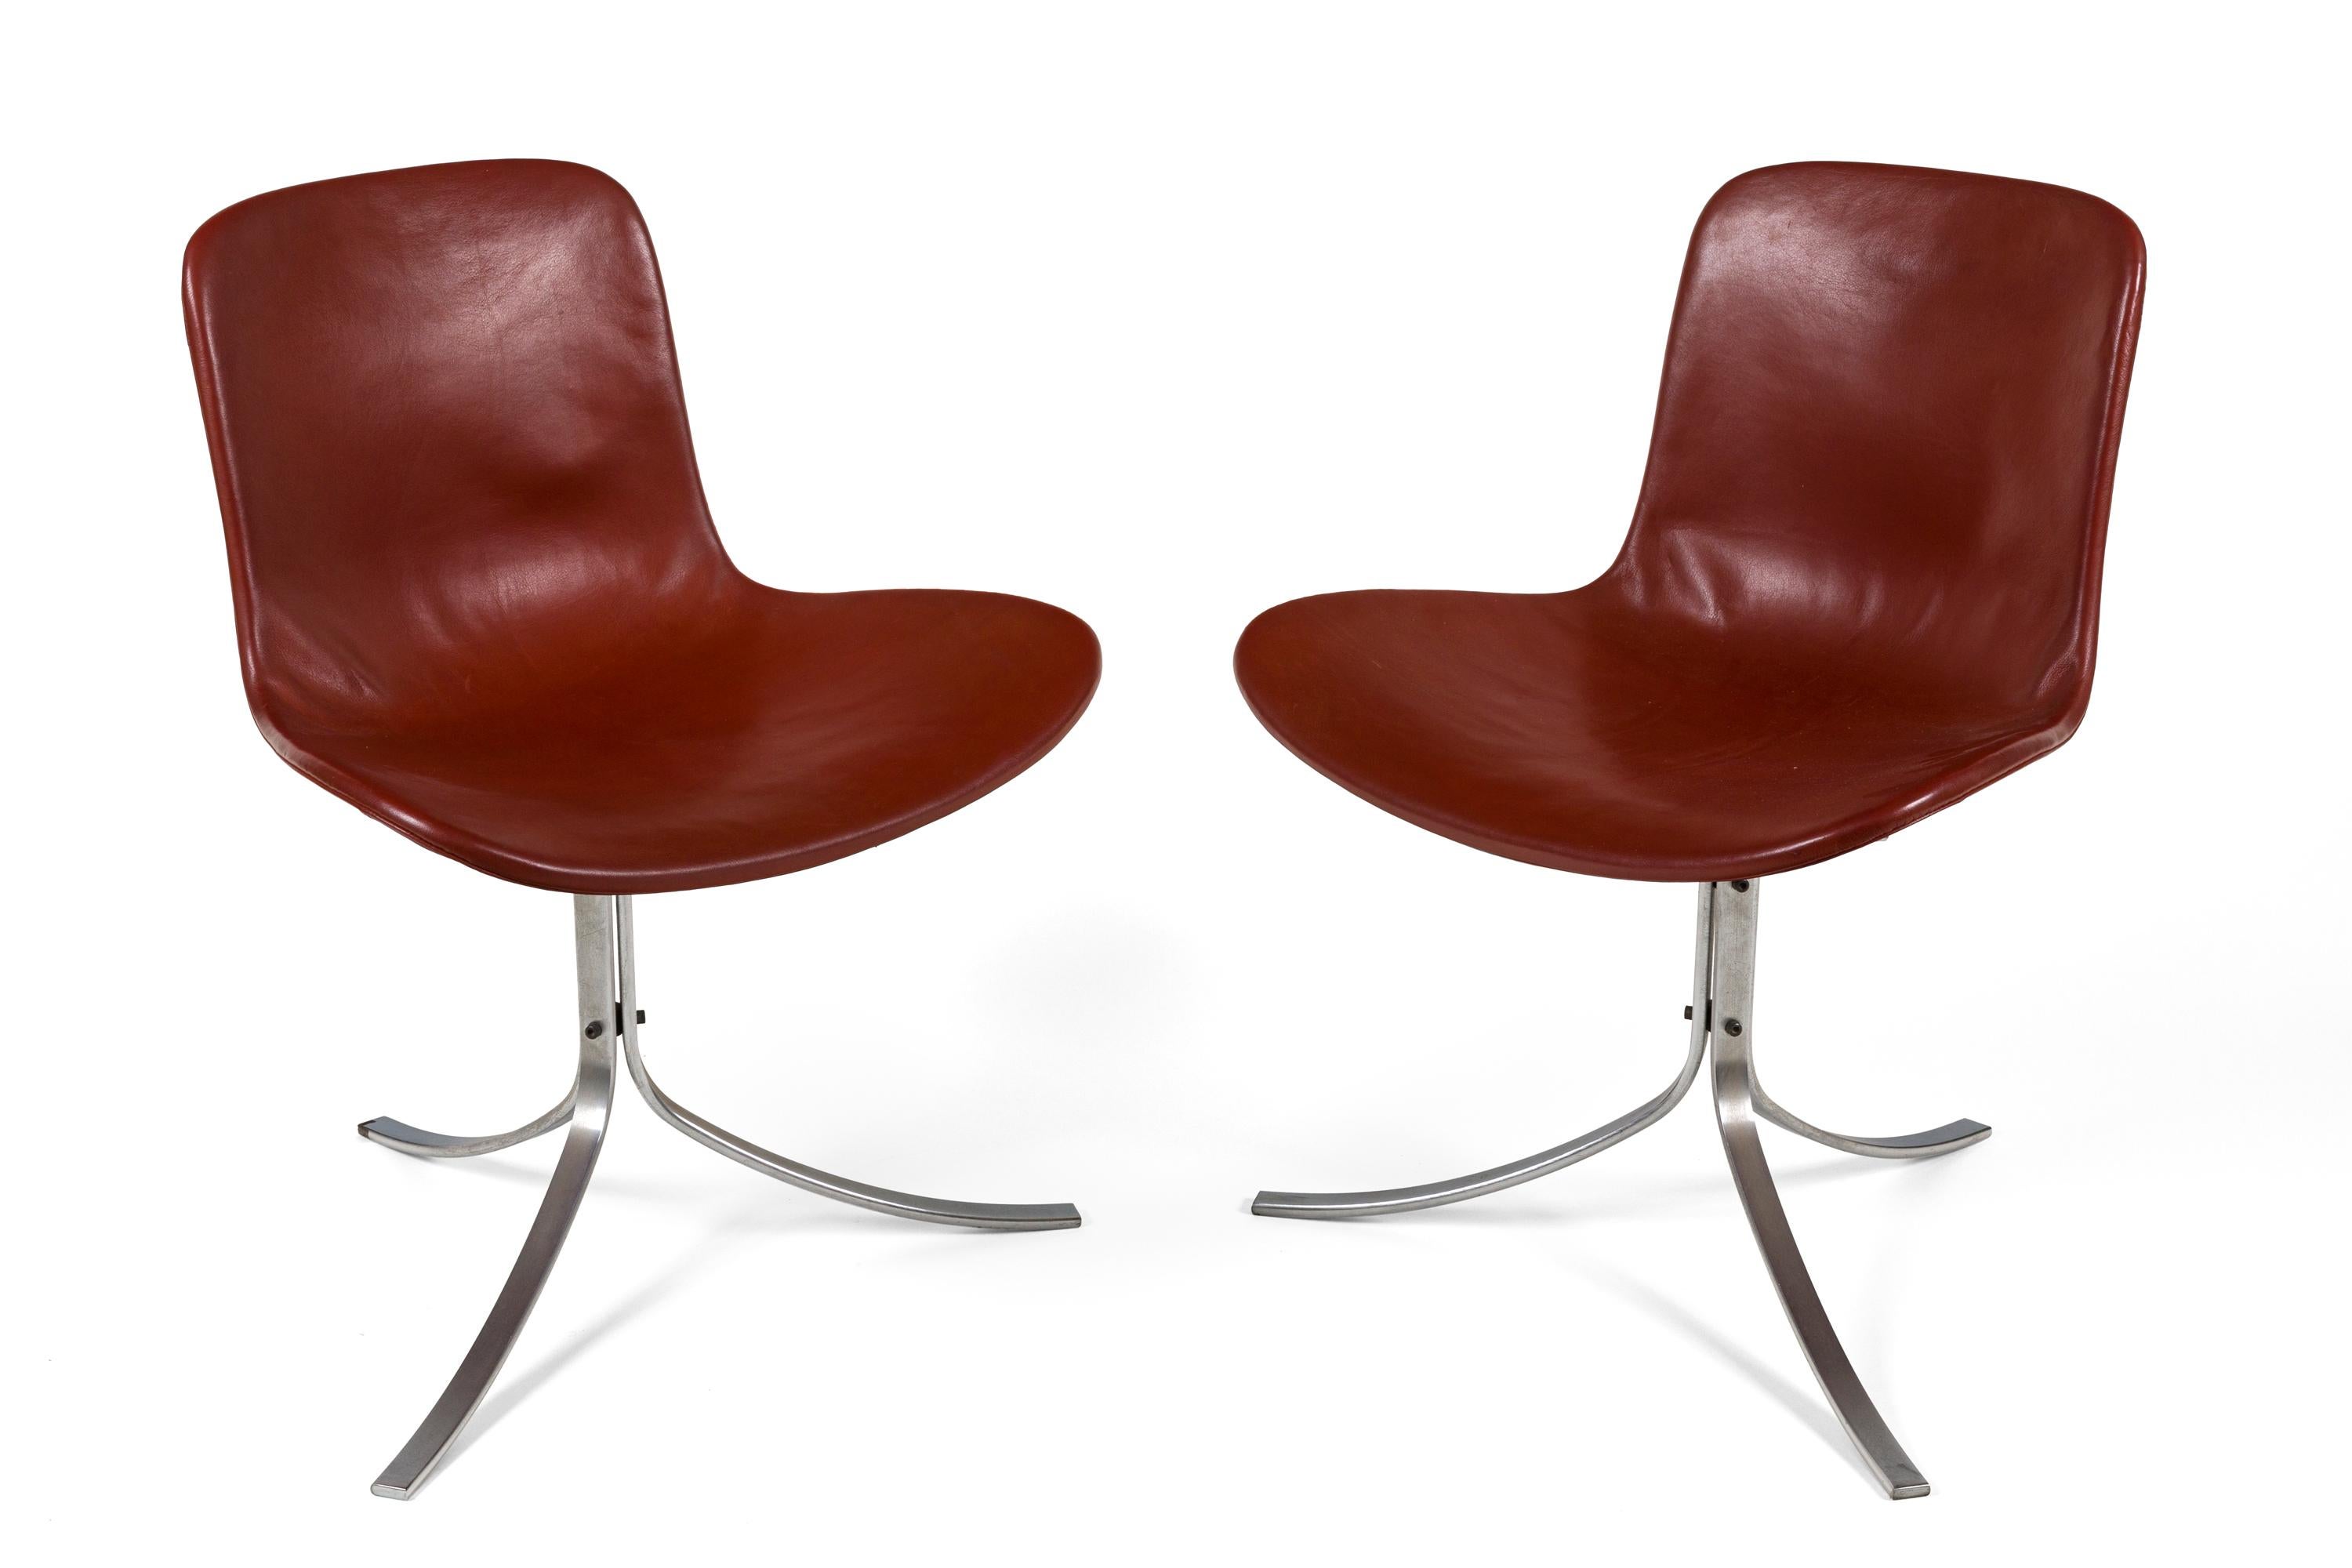 A pair of PK 9 chairs in very good condition, upholstered in brown leather with chromed steel frames. Marked with E. Kold Christensen's logo.